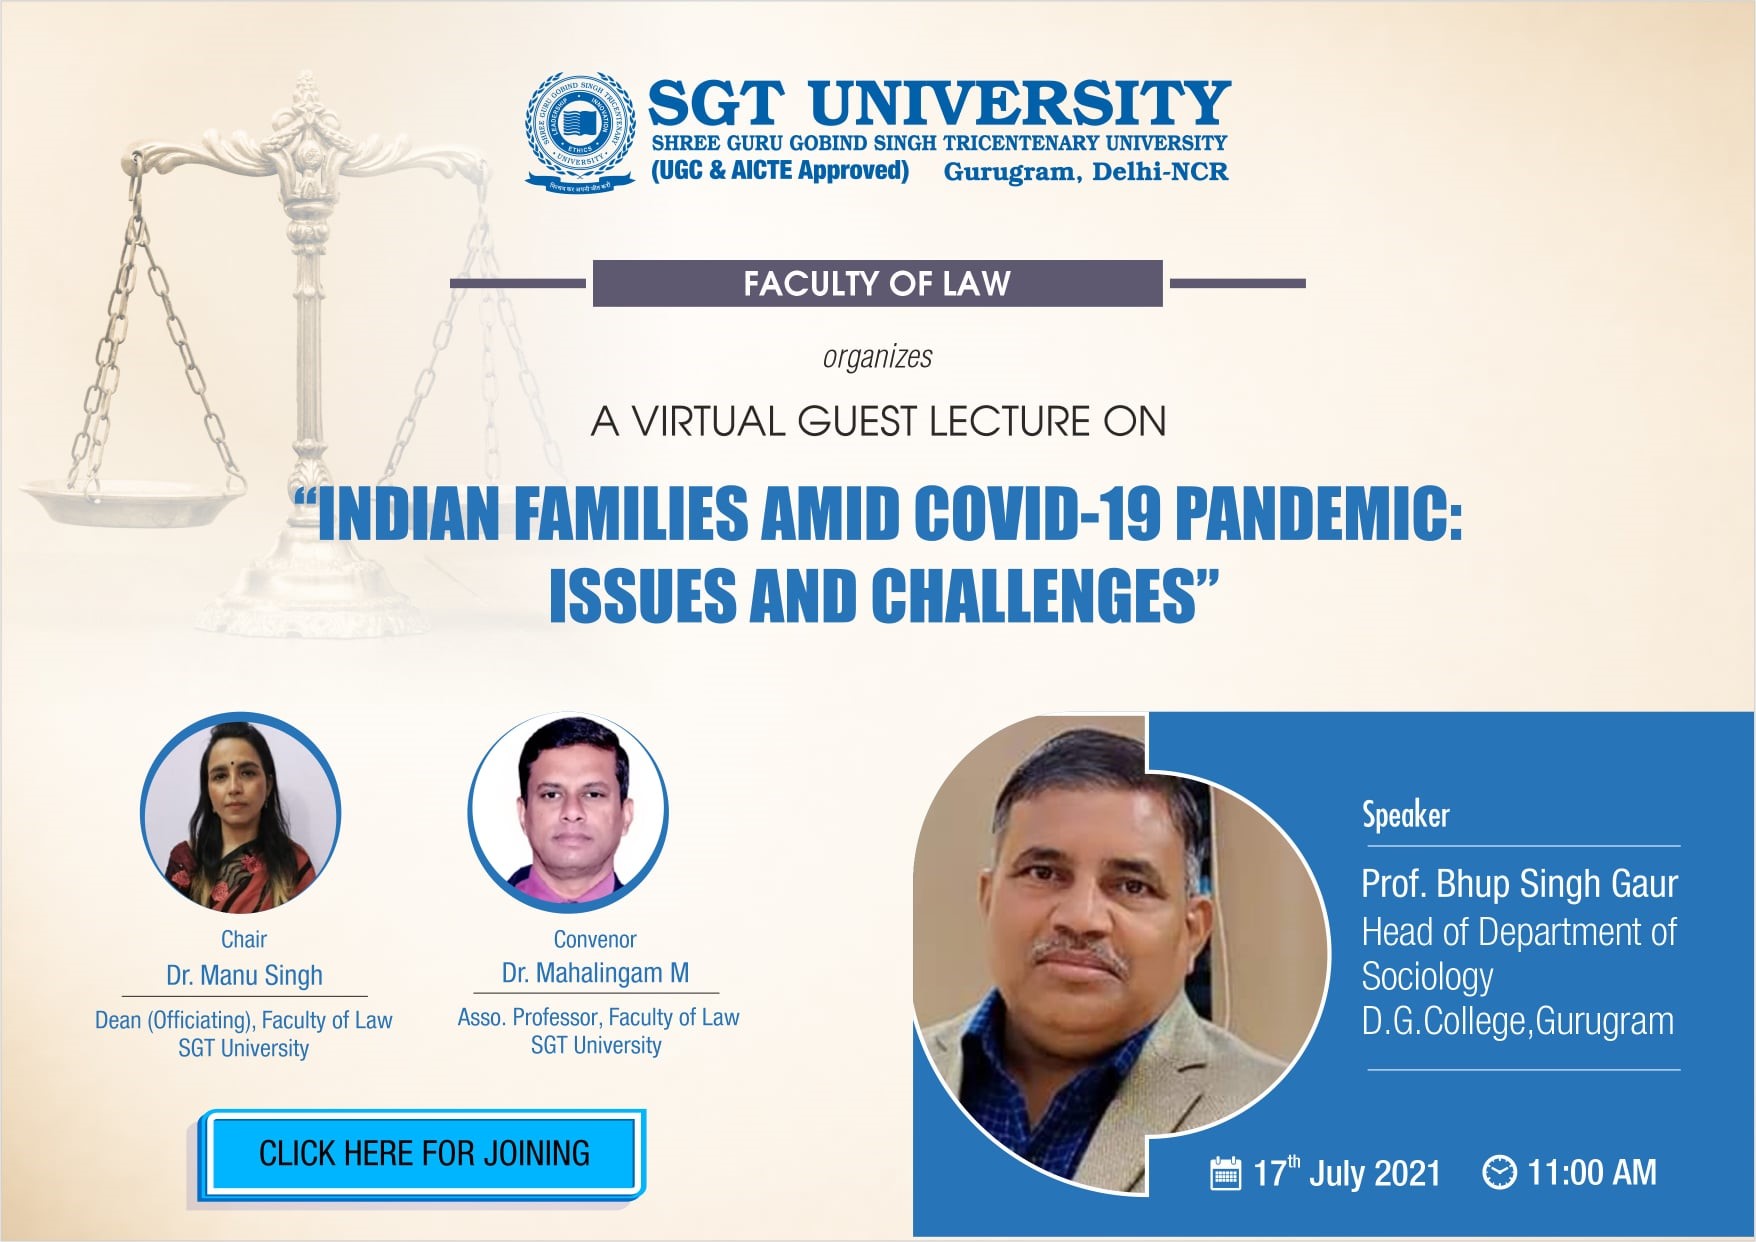 Read more about the article VIRTUAL GUEST LECTURE ON “𝐈𝐧𝐝𝐢𝐚𝐧 𝐅𝐚𝐦𝐢𝐥𝐢𝐞𝐬 𝐀𝐦𝐢𝐝 𝐂𝐨𝐯𝐢𝐝-𝟏𝟗 𝐏𝐚𝐧𝐝𝐞𝐦𝐢𝐜: 𝐈𝐬𝐬𝐮𝐞𝐬 𝐚𝐧𝐝 𝐂𝐡𝐚𝐥𝐥𝐞𝐧𝐠𝐞𝐬”